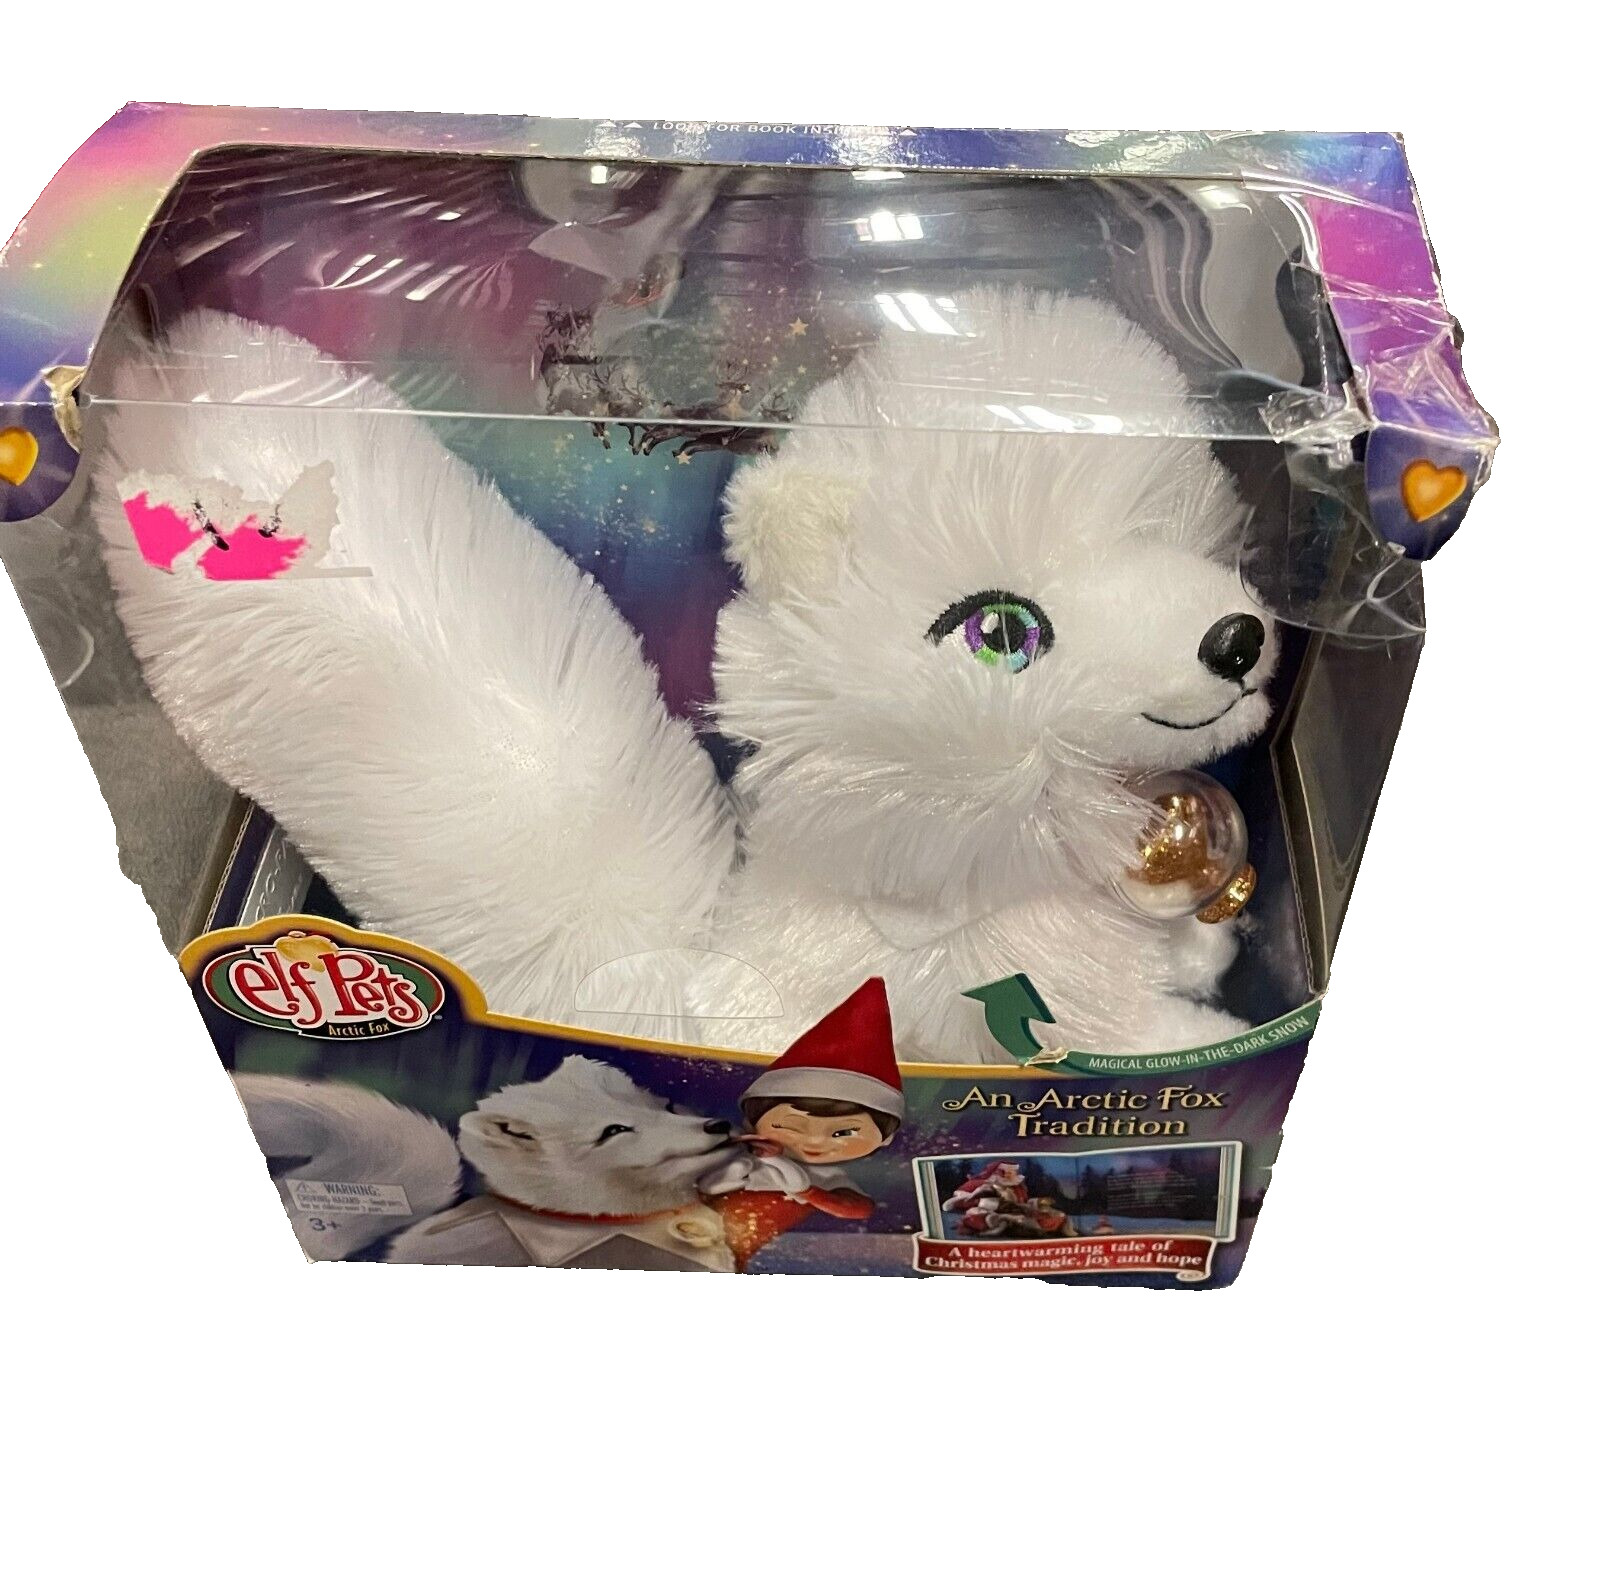 Elf Pets An Arctic Fox Tradition Plush & Storybook blemishes Box top right New